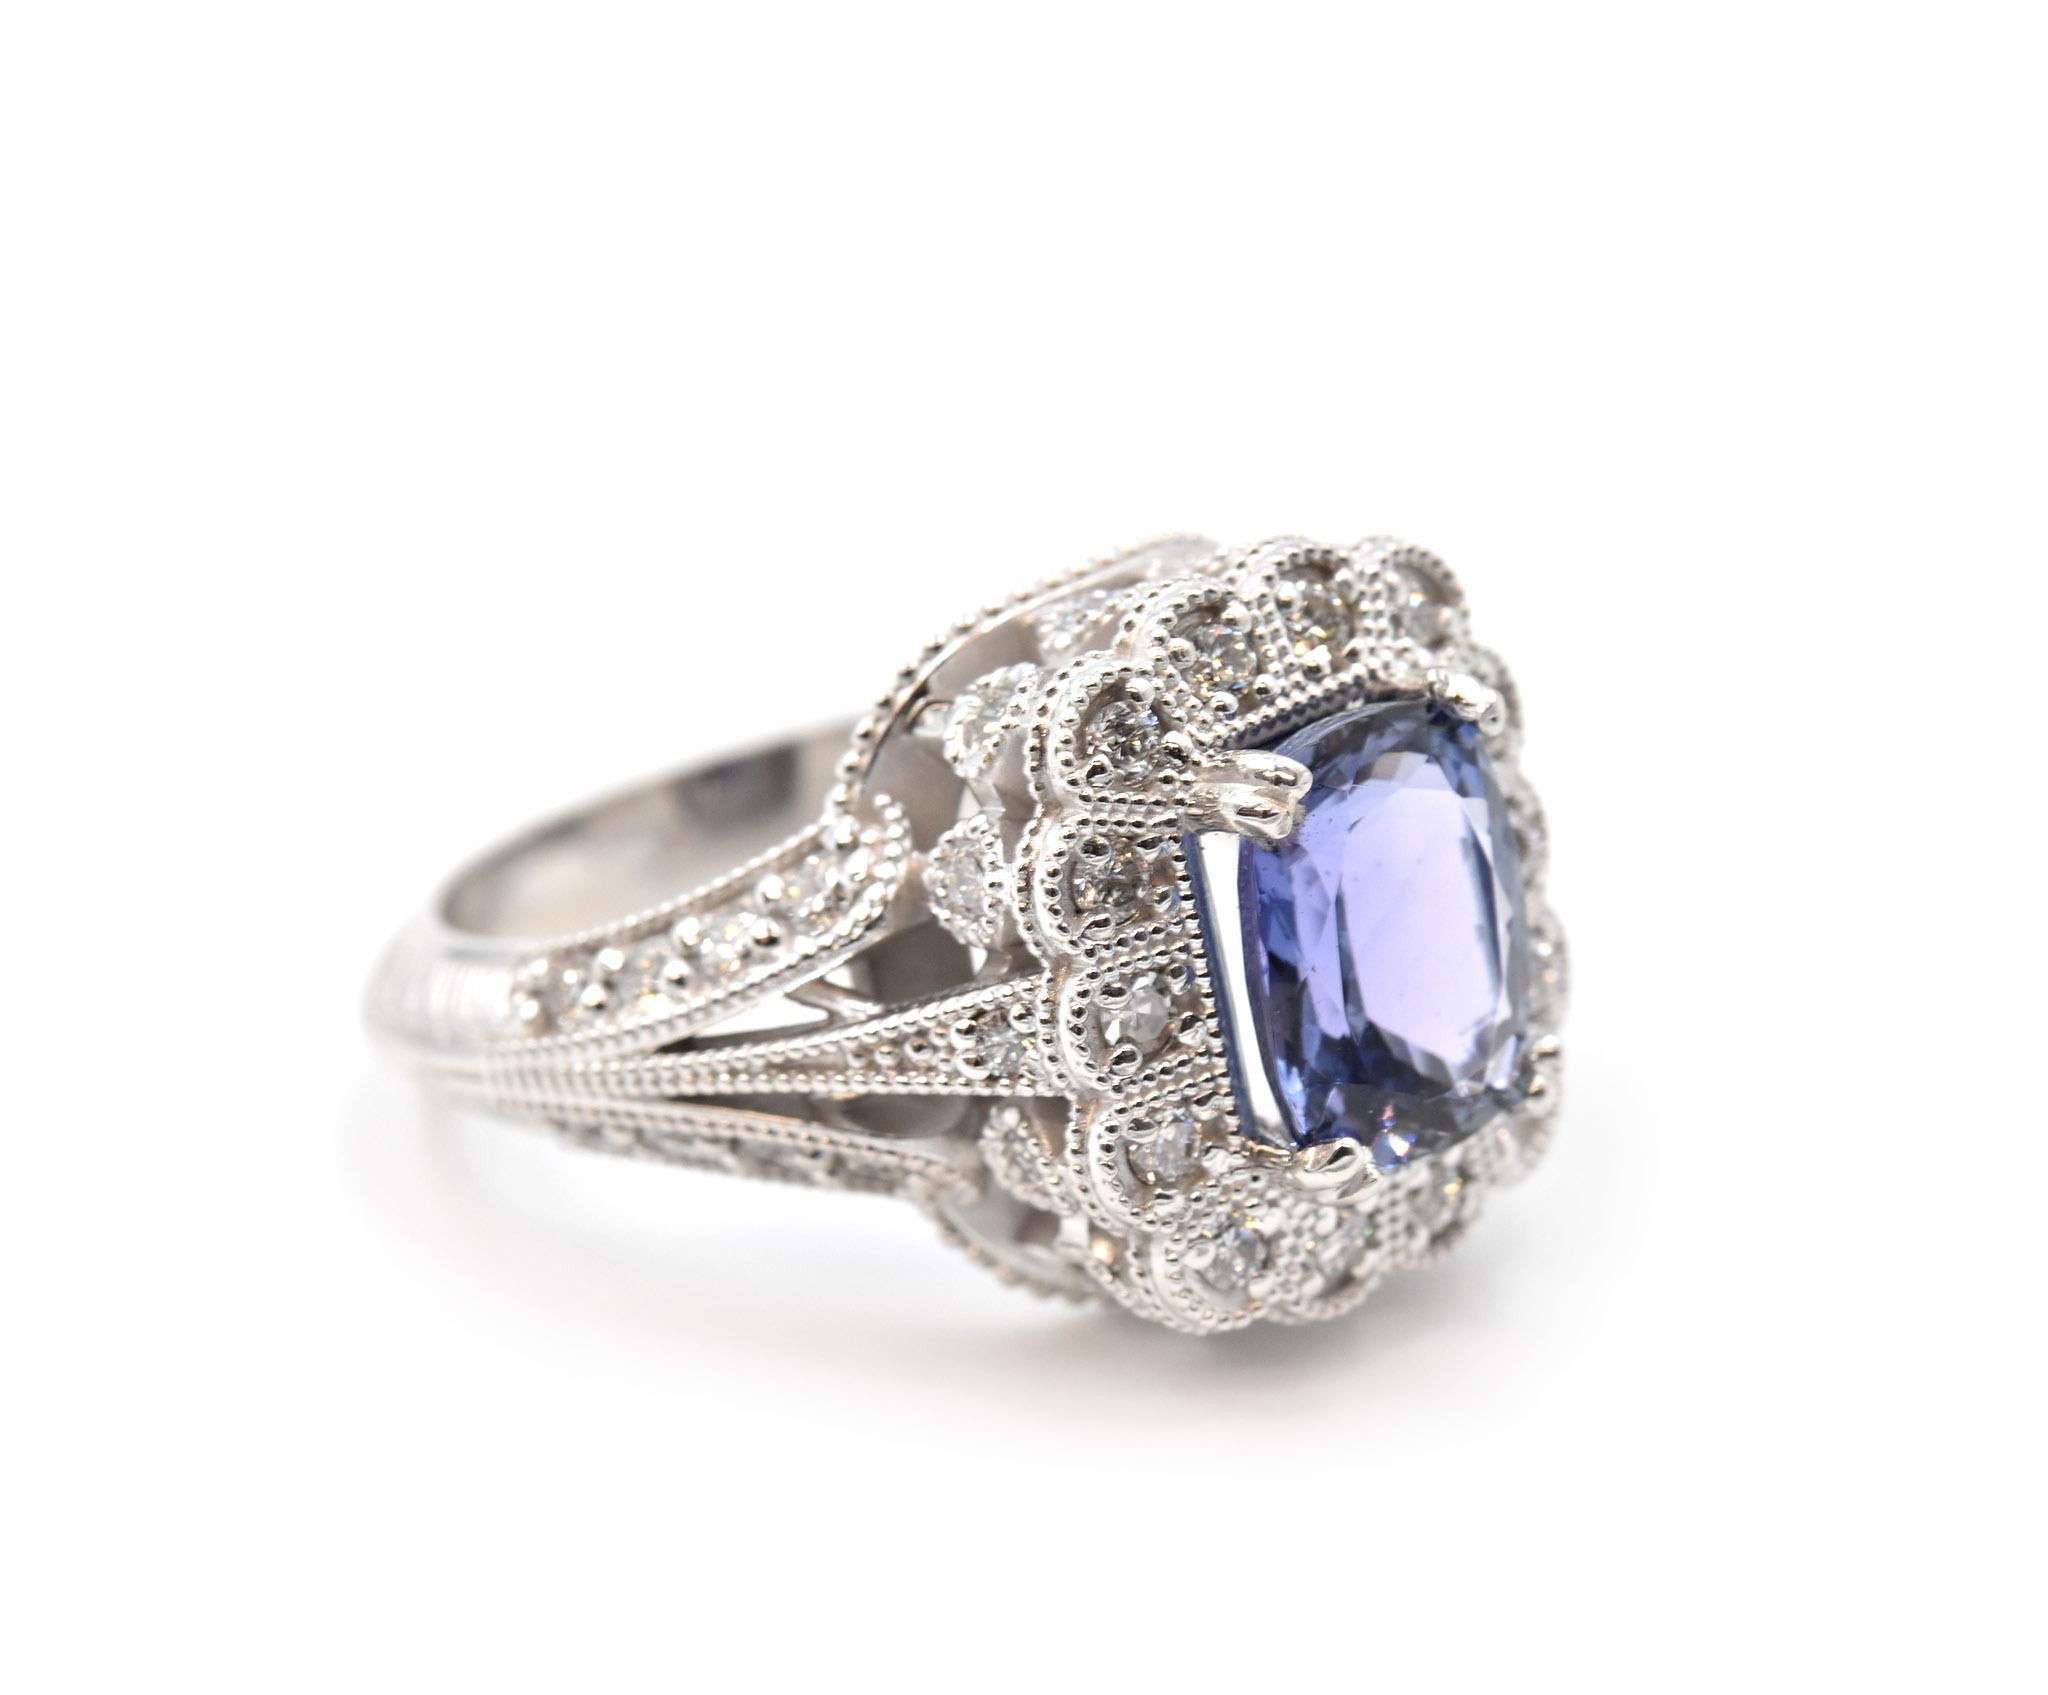 Designer: custom design
Material: 14k white gold
Tanzanite: 1.78 carat oval cut
Diamonds: 41 round brilliant cut = 1.00 carat weight
Color: G
Clarity: VS
Ring Size: 8 (please allow two additional shipping days for sizing requests)
Weight: 8.2 grams 
